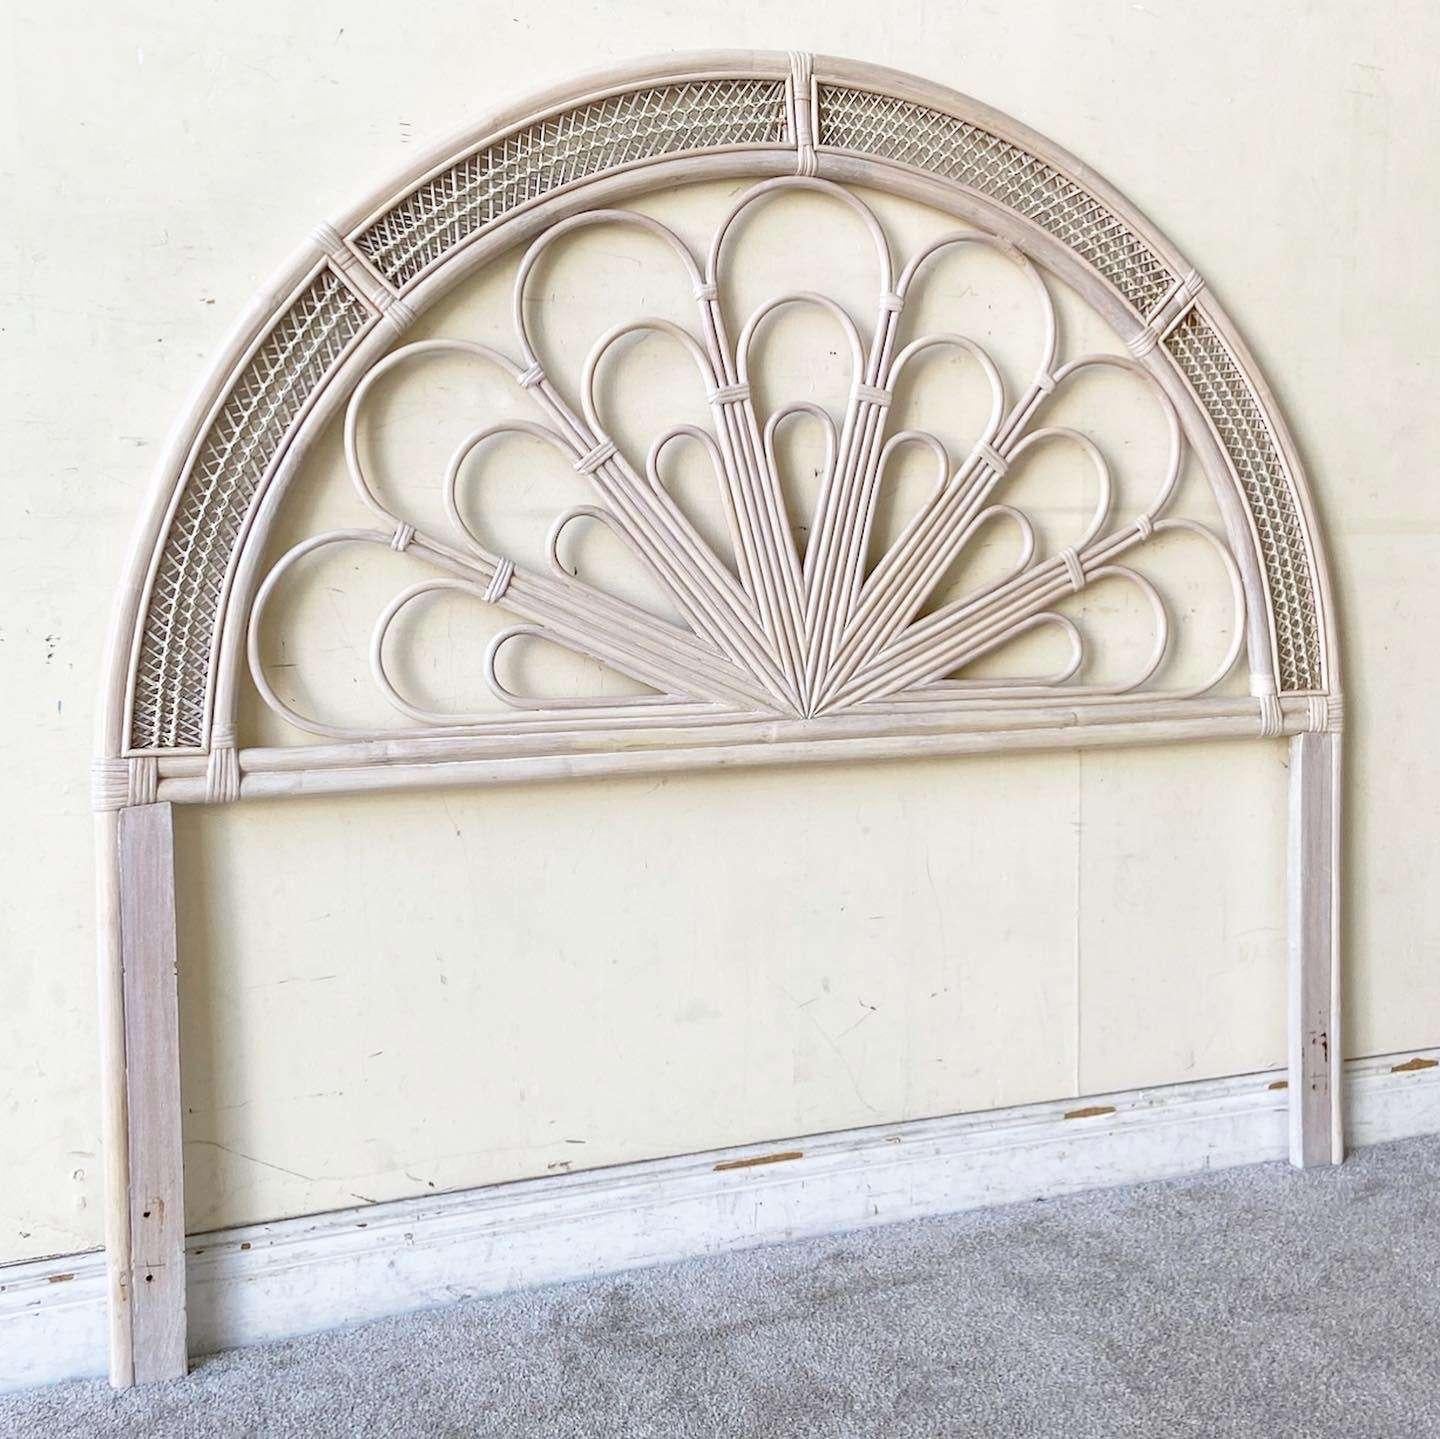 Incredible vintage bohemian queen size headboard. Features an arched bamboo frame with rattan and weaving throughout.